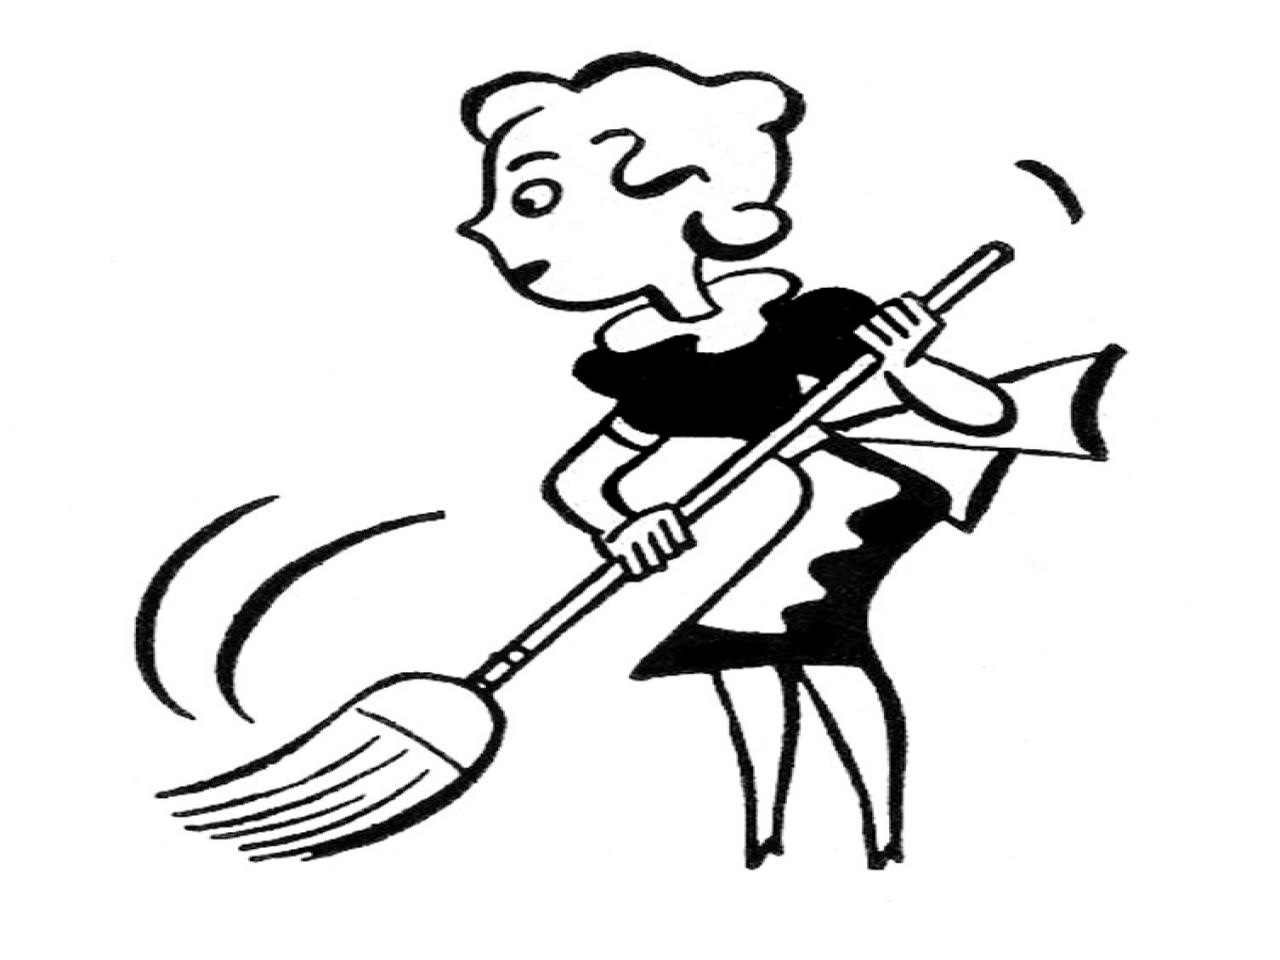 Cleaning supplies clip art black and white 